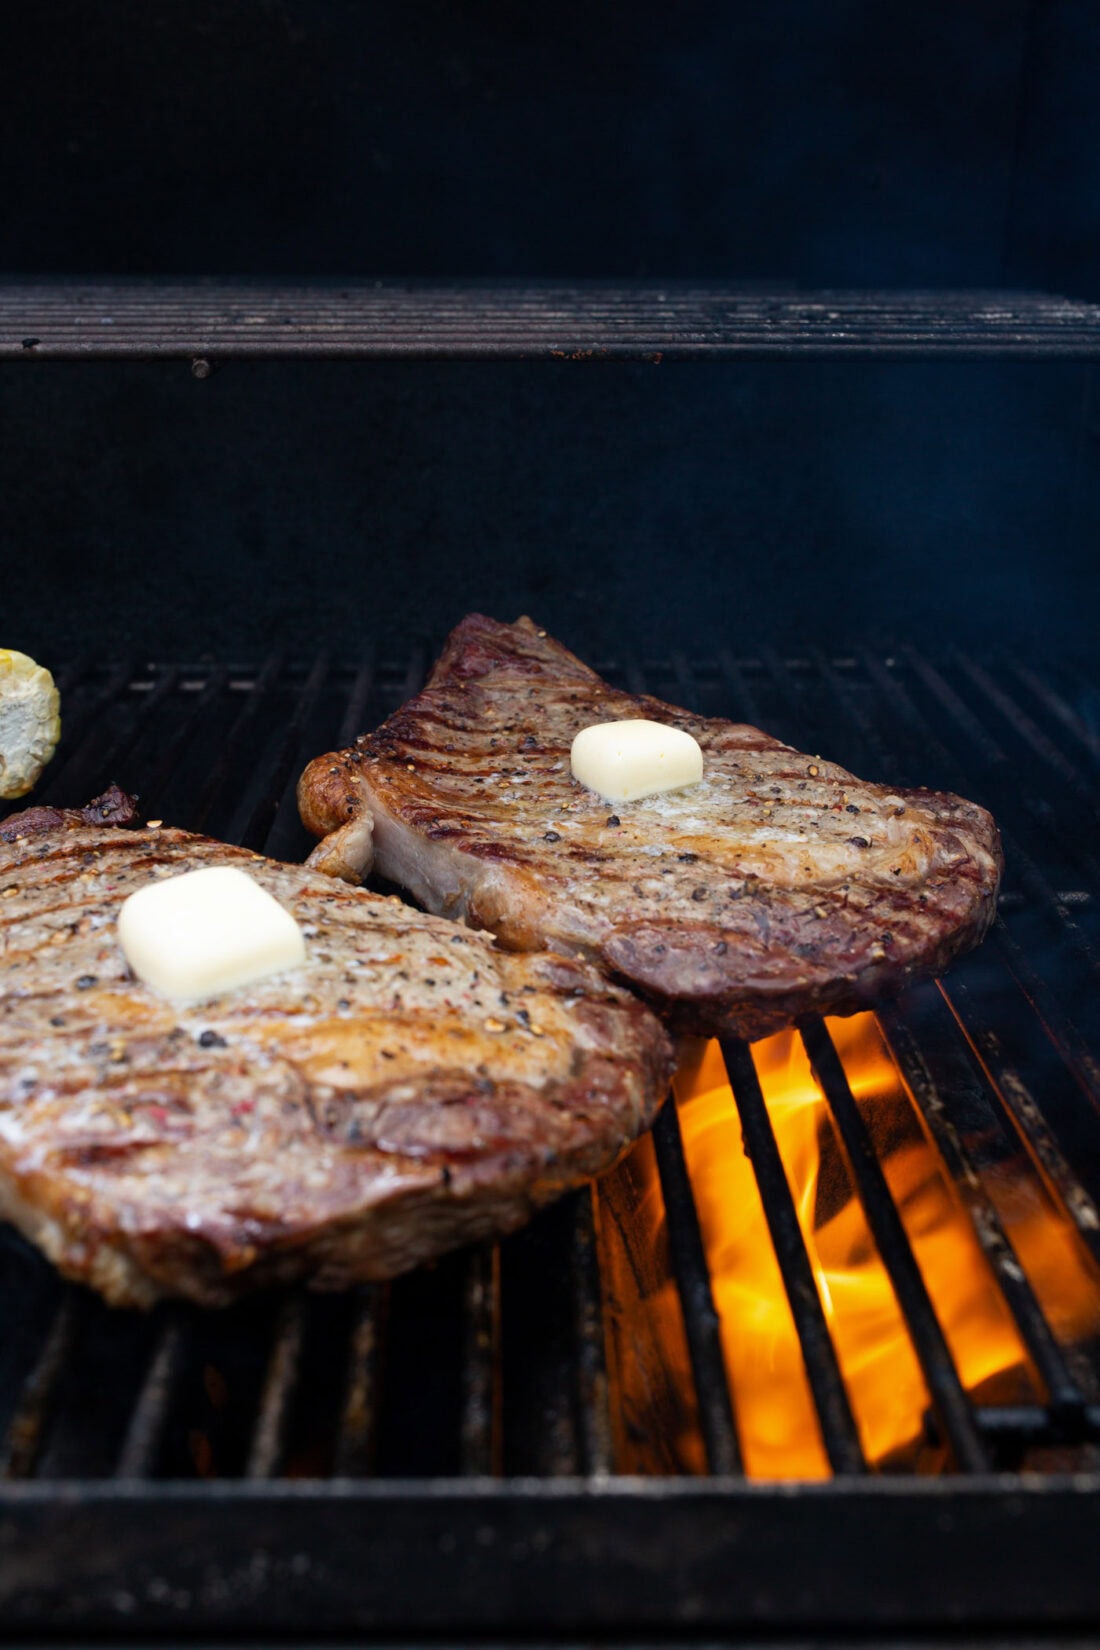 Two steaks on the grill with pats of butter